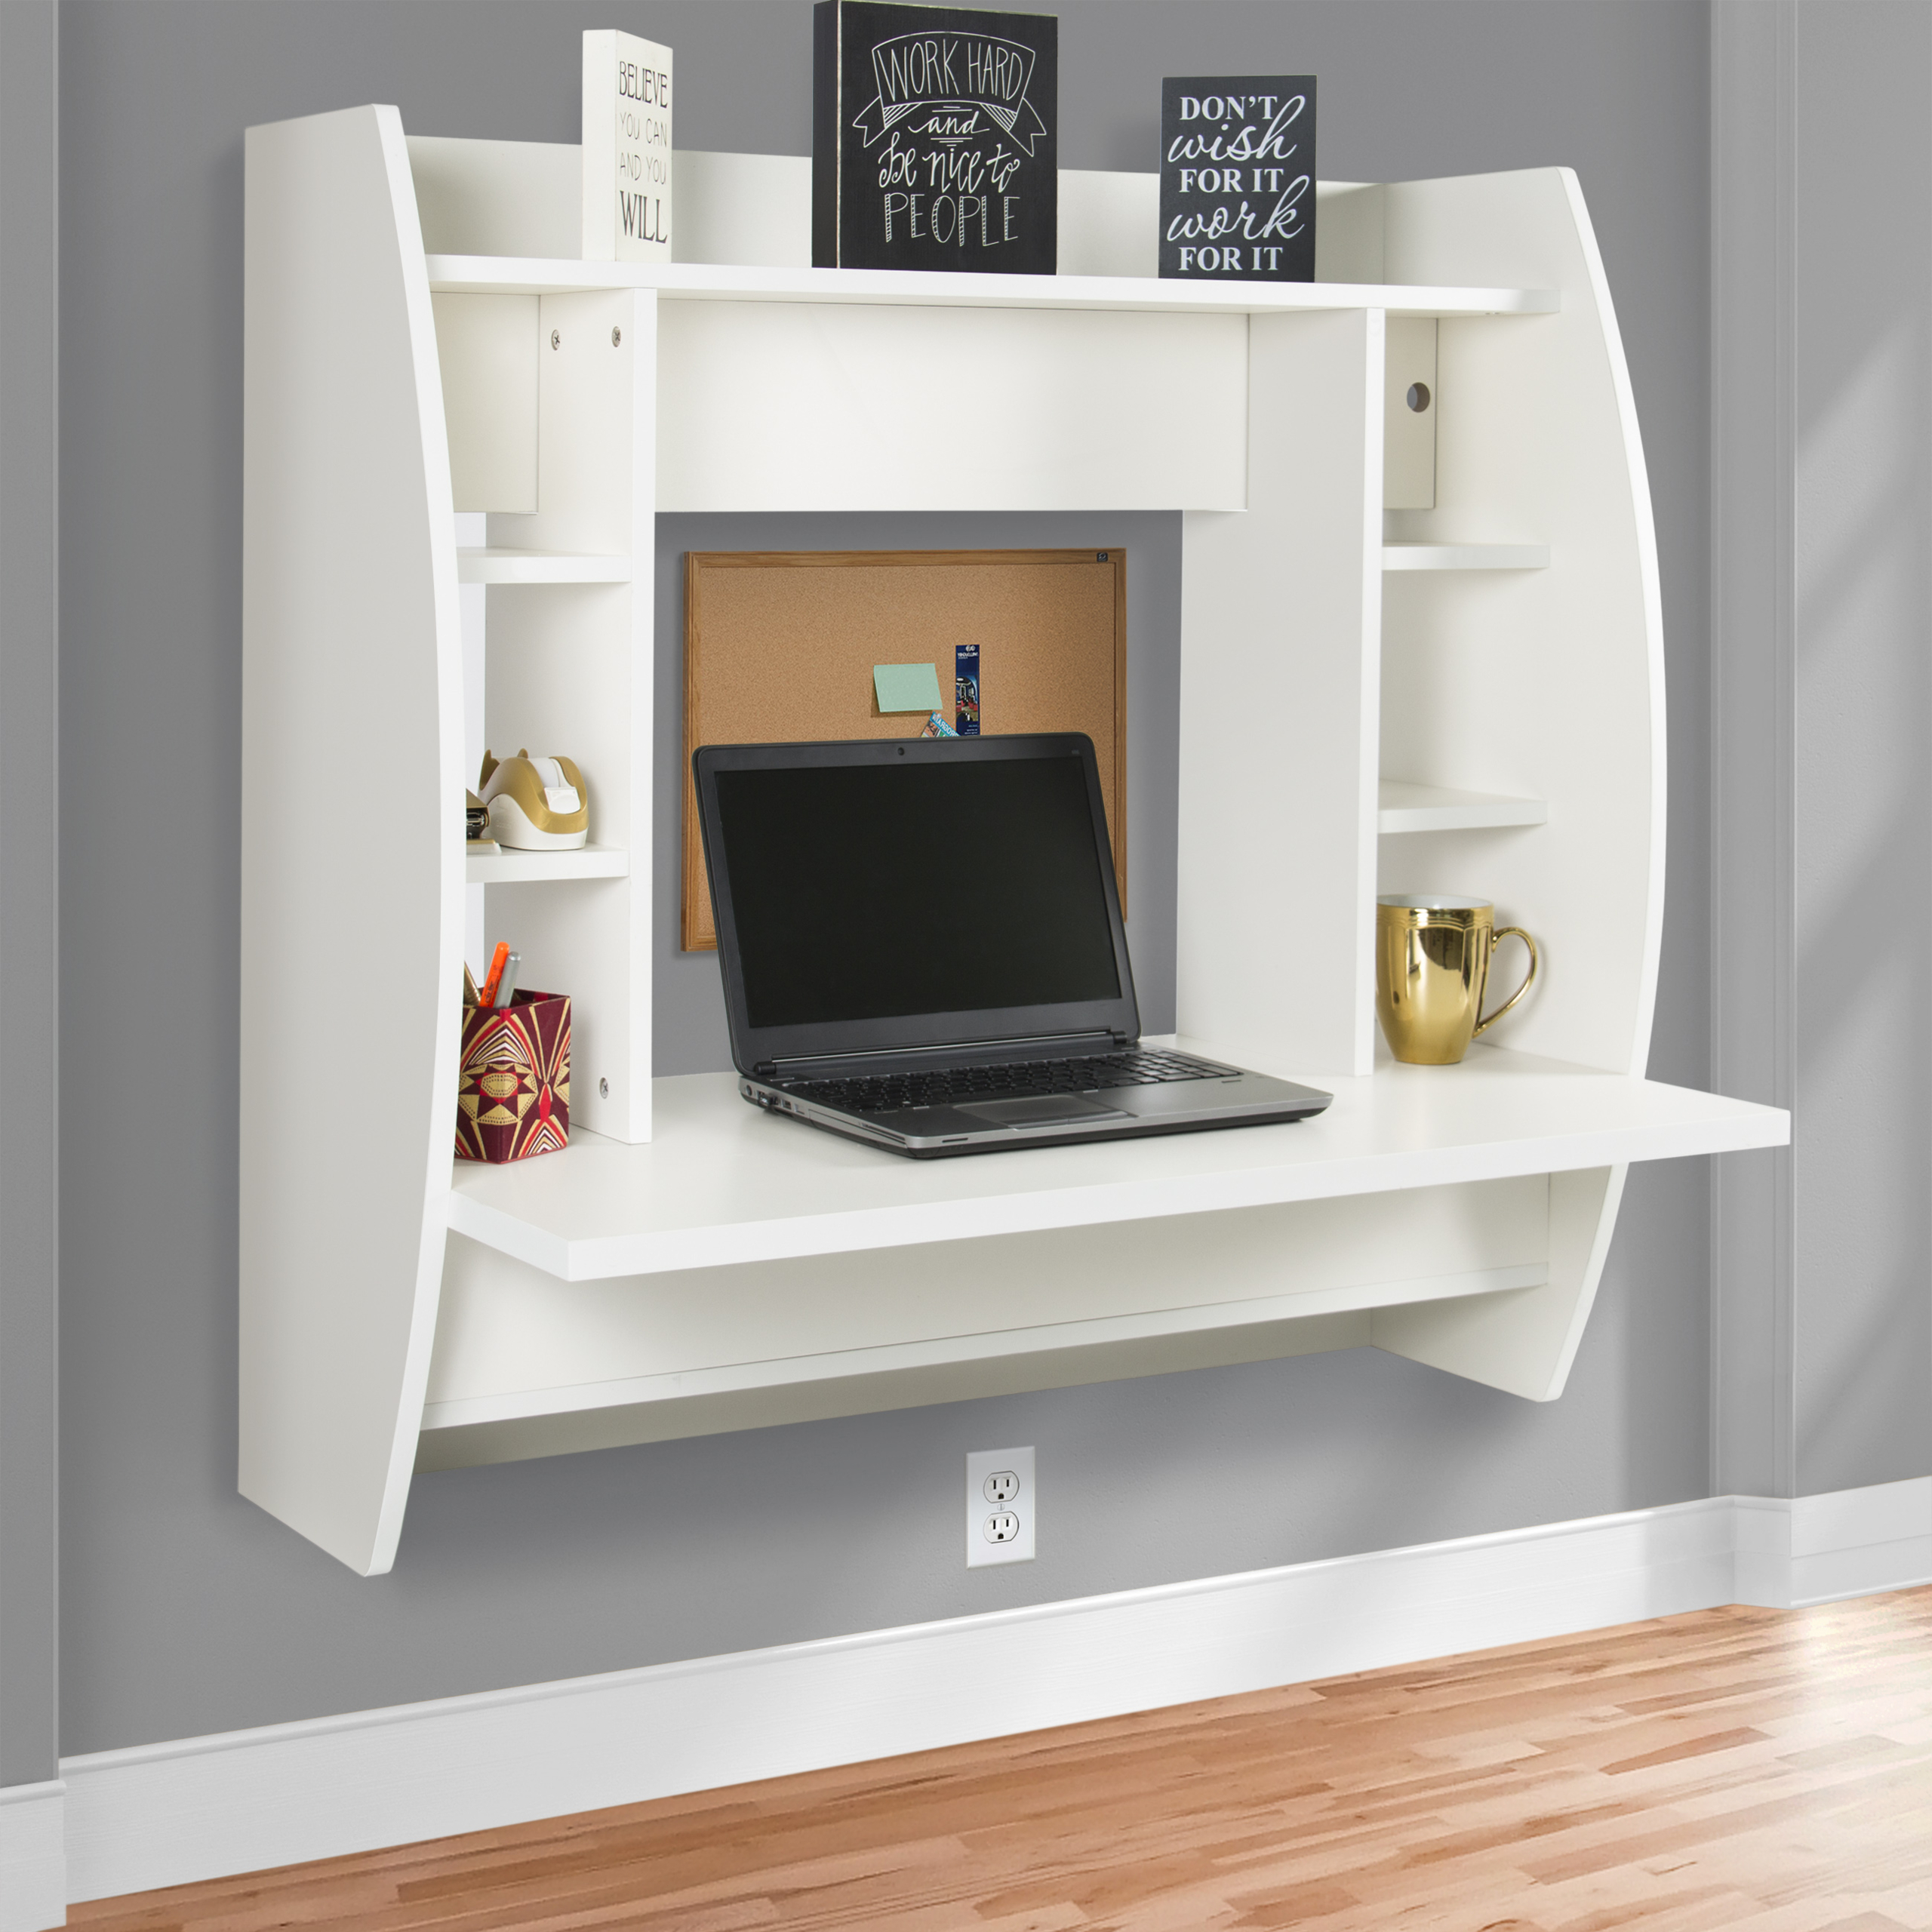 Wall Mounted Computer Desk You Ll Love In 2021 Visualhunt - Wall Mounted Computer Desk Plans